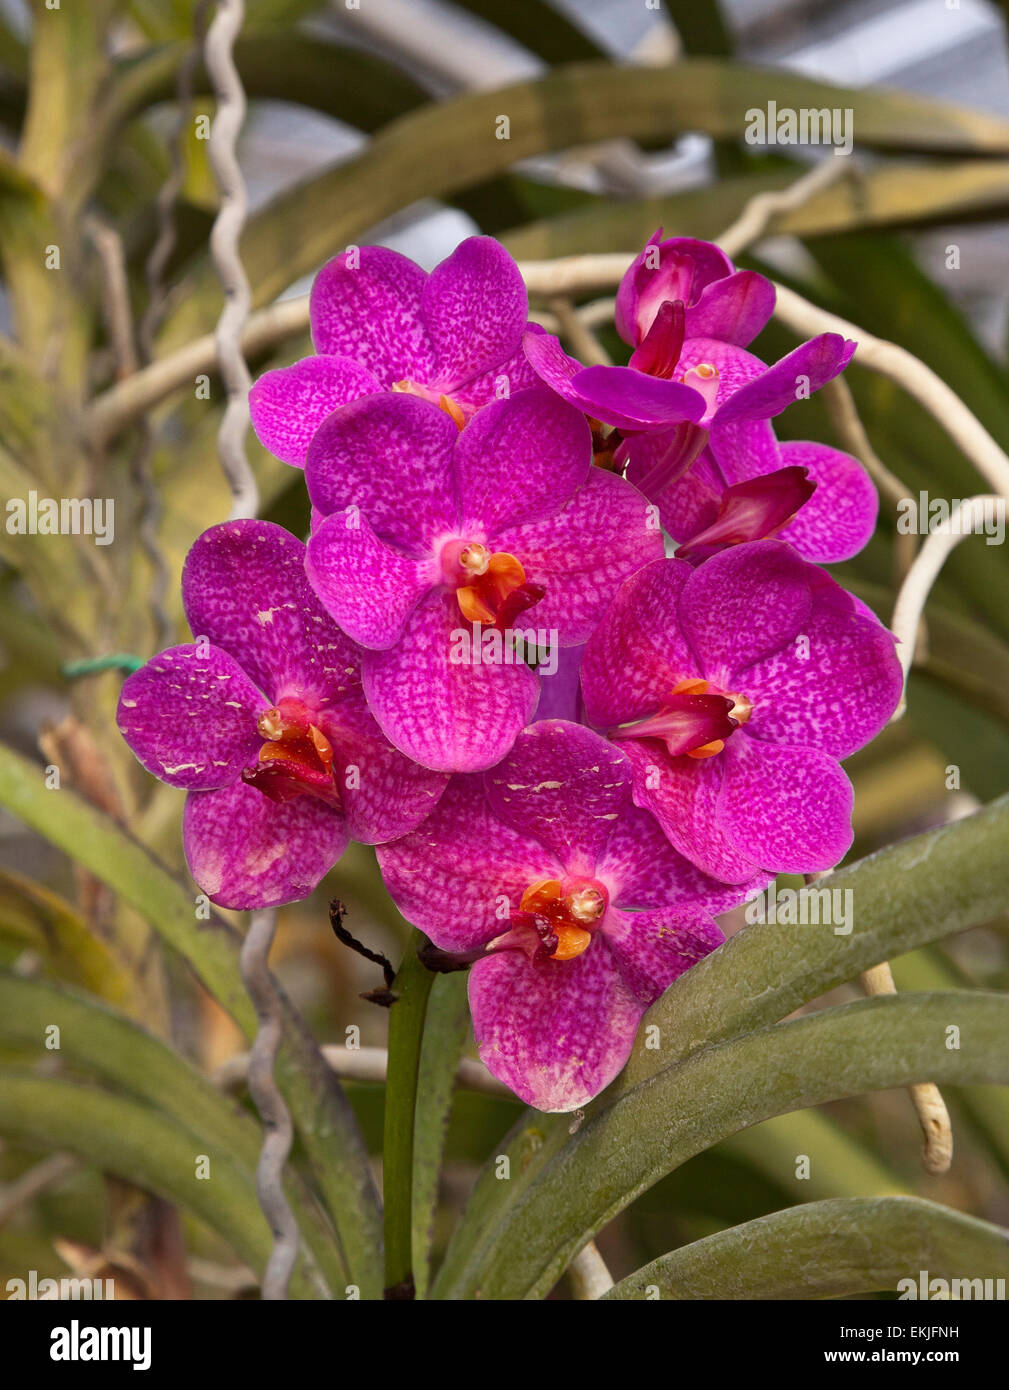 Tropical orchid hybrid diversity, Thailand Stock Photo